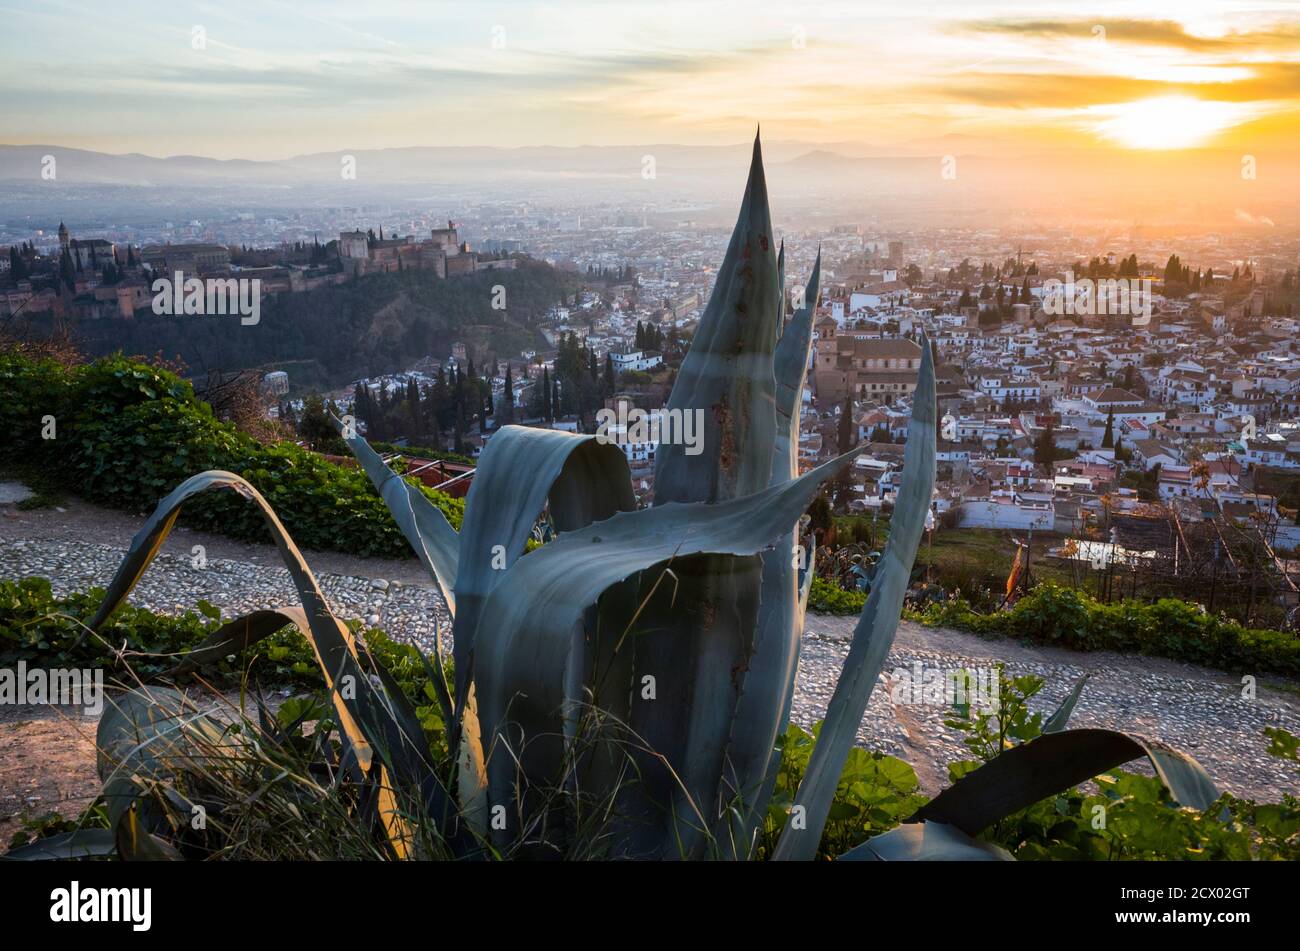 Granada, Spain - January 17th, 2020 : Alhambra palace and Unesco listed Albaicin district overview at sunset as seen from San Miguel Alto viewpoint. Stock Photo